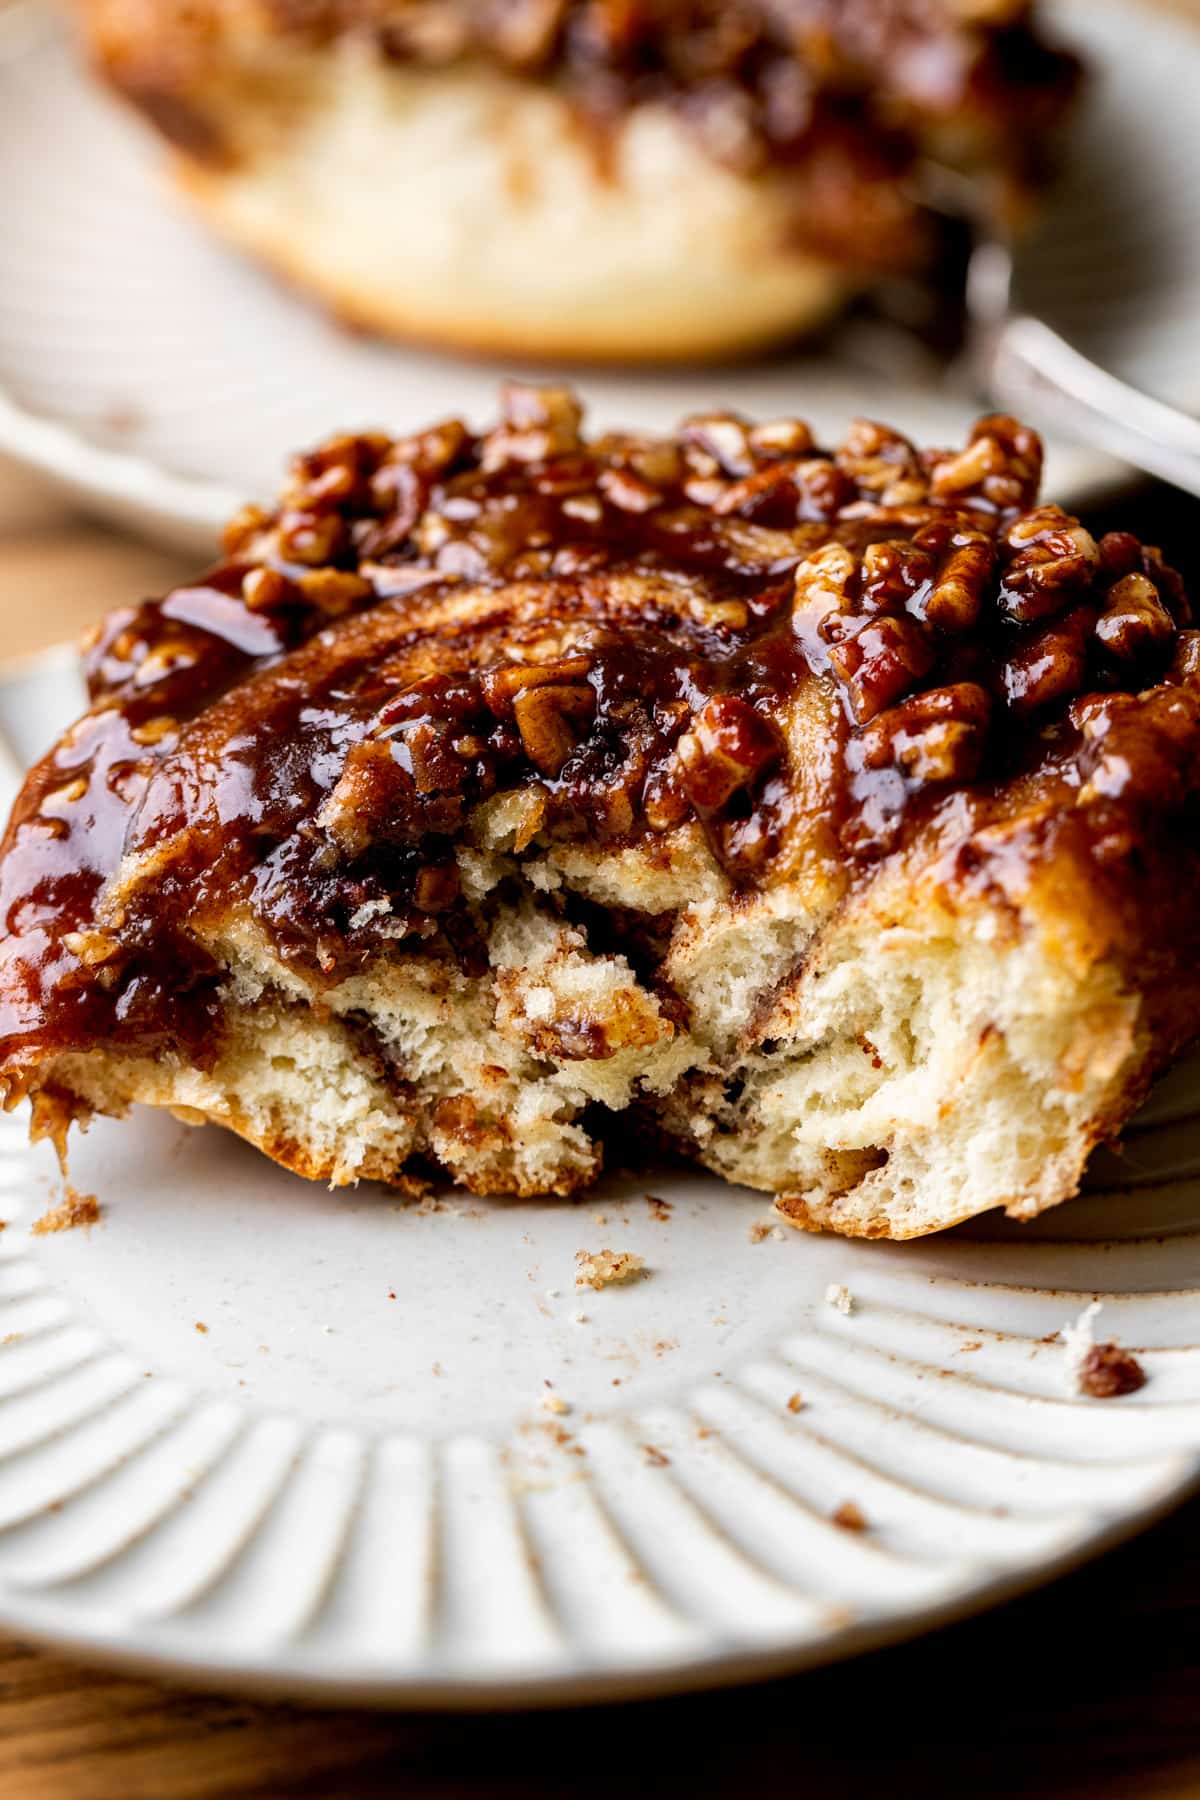 Side view of giant sticky bun on a plate.